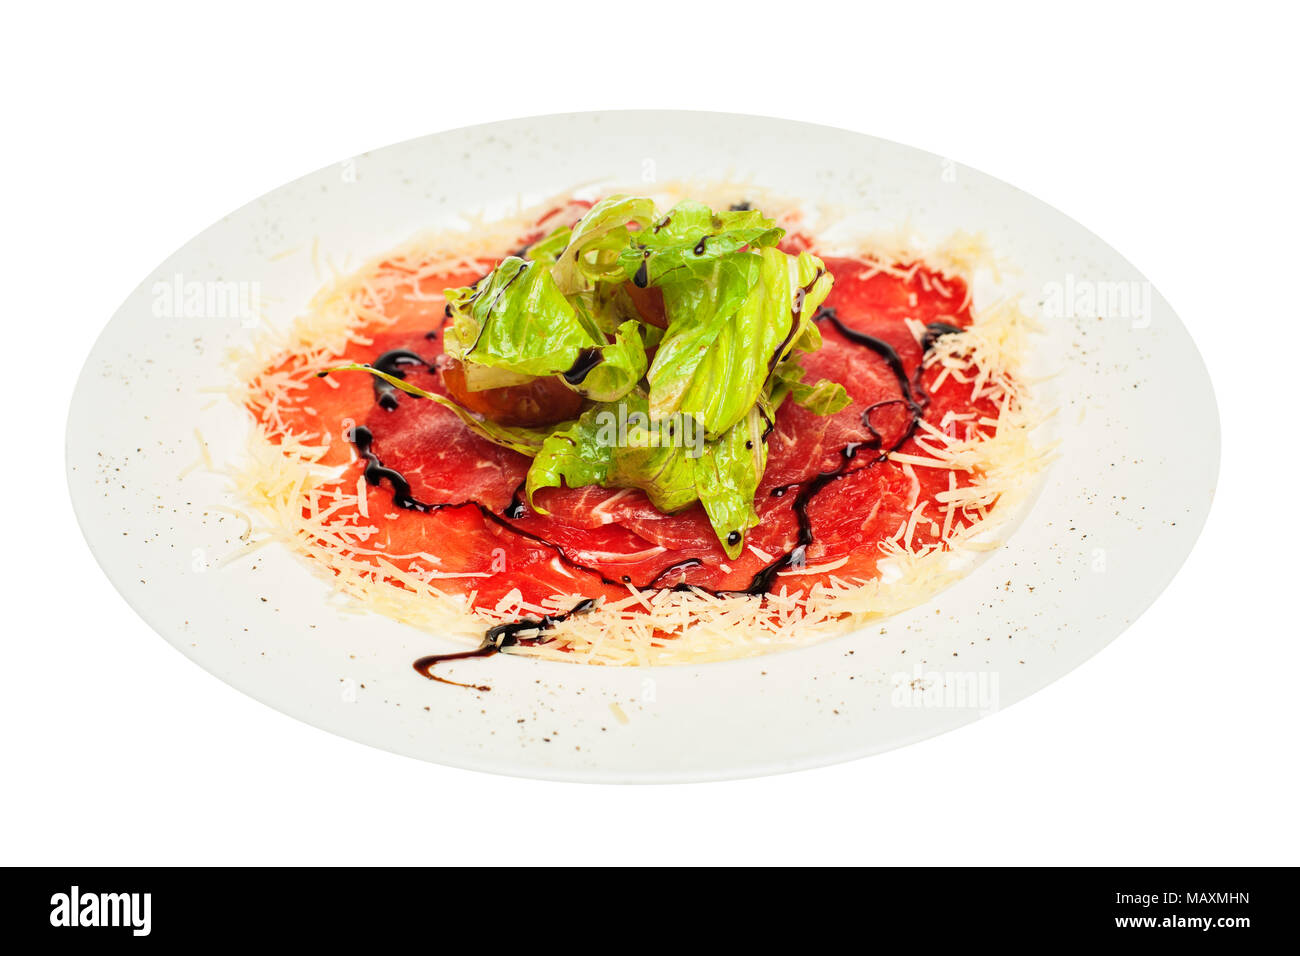 Carpaccio with parmesan on plate isolated on white background. Gourmet restaurant food Stock Photo